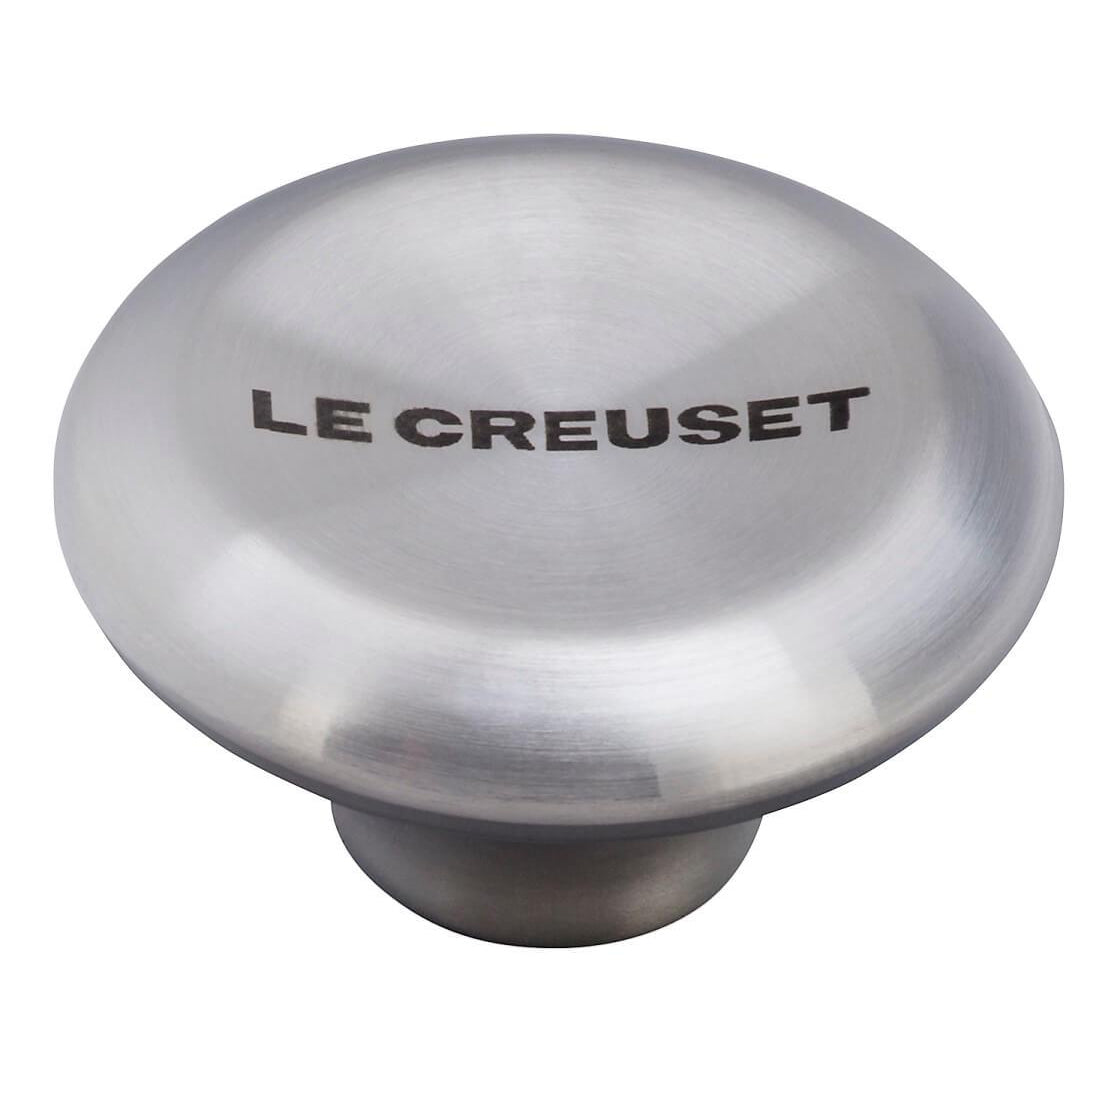 Le Creuset Replacement Signature Knobs Stainless Steel